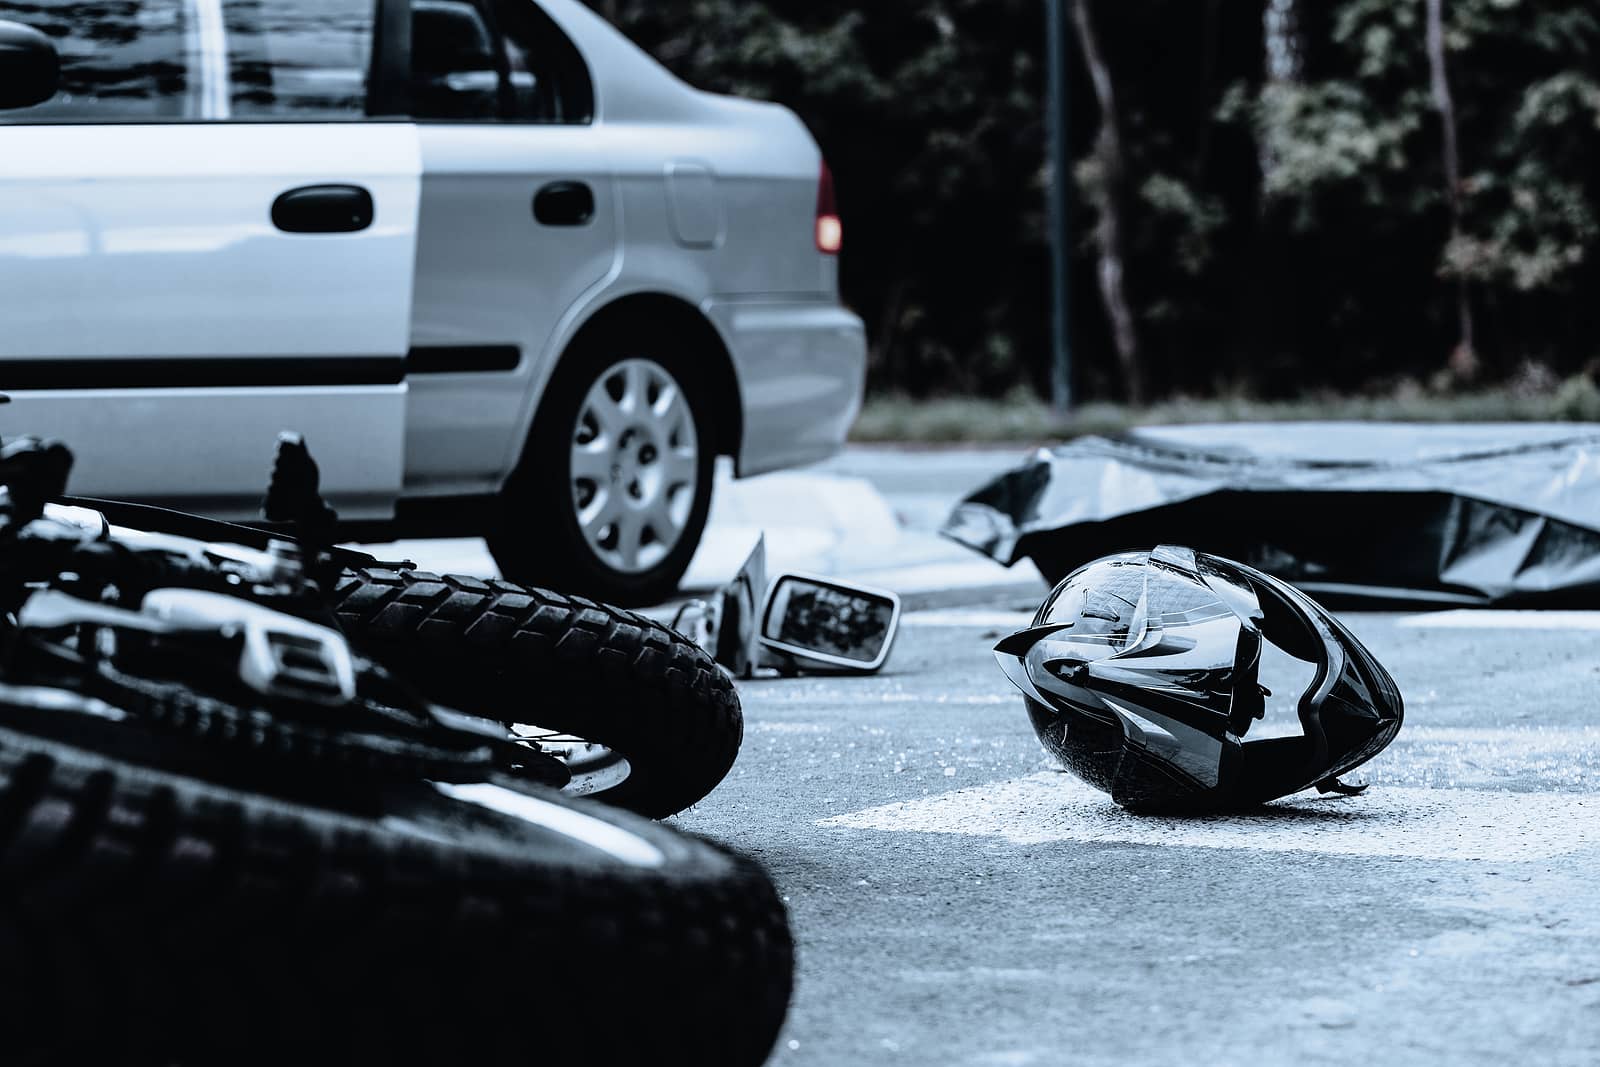 Motorcycle Accident Settlement 101: What to Expect